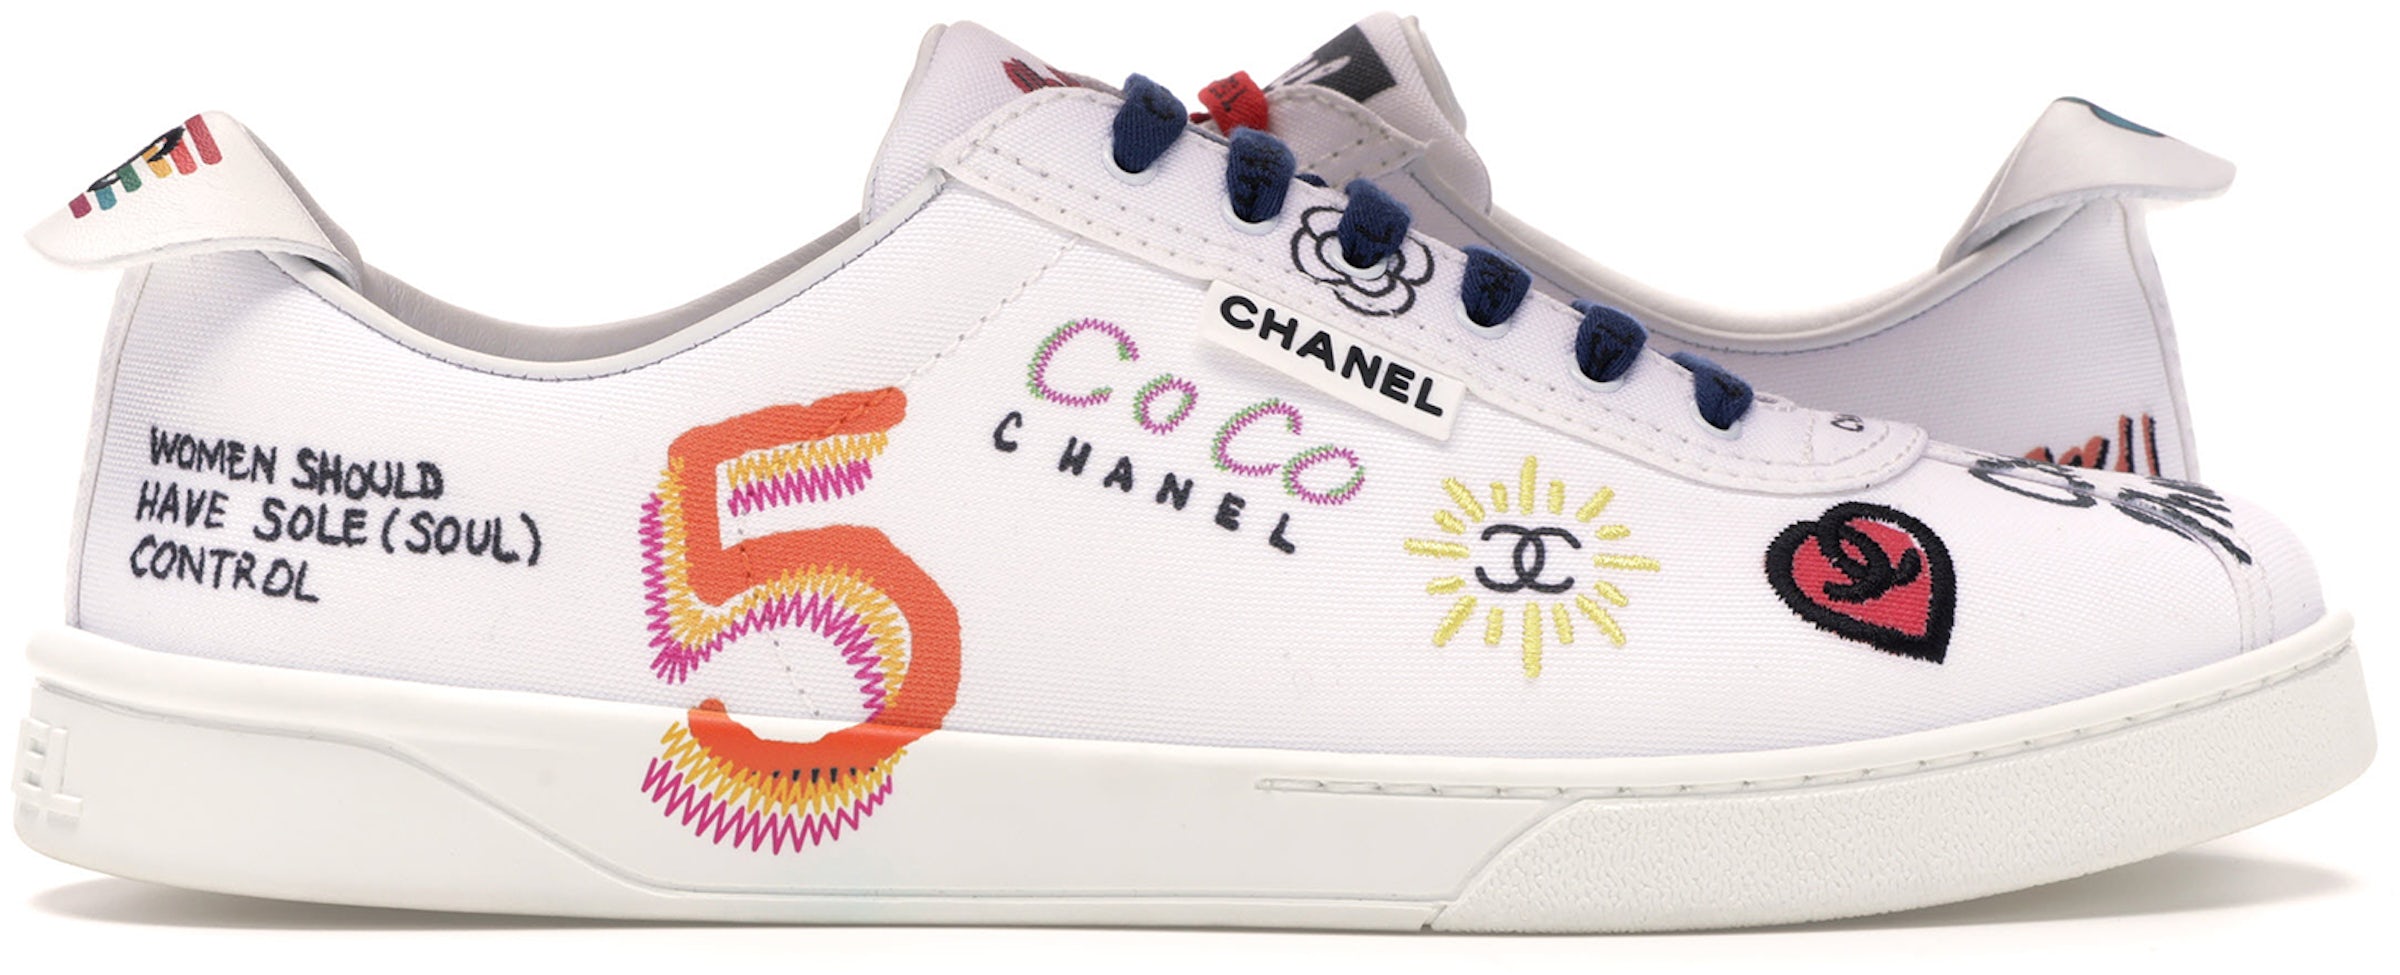 Chanel Flat Shoes Sneakers Coco Mark Silver Ladies Size 38/US Size 7 from  Japan